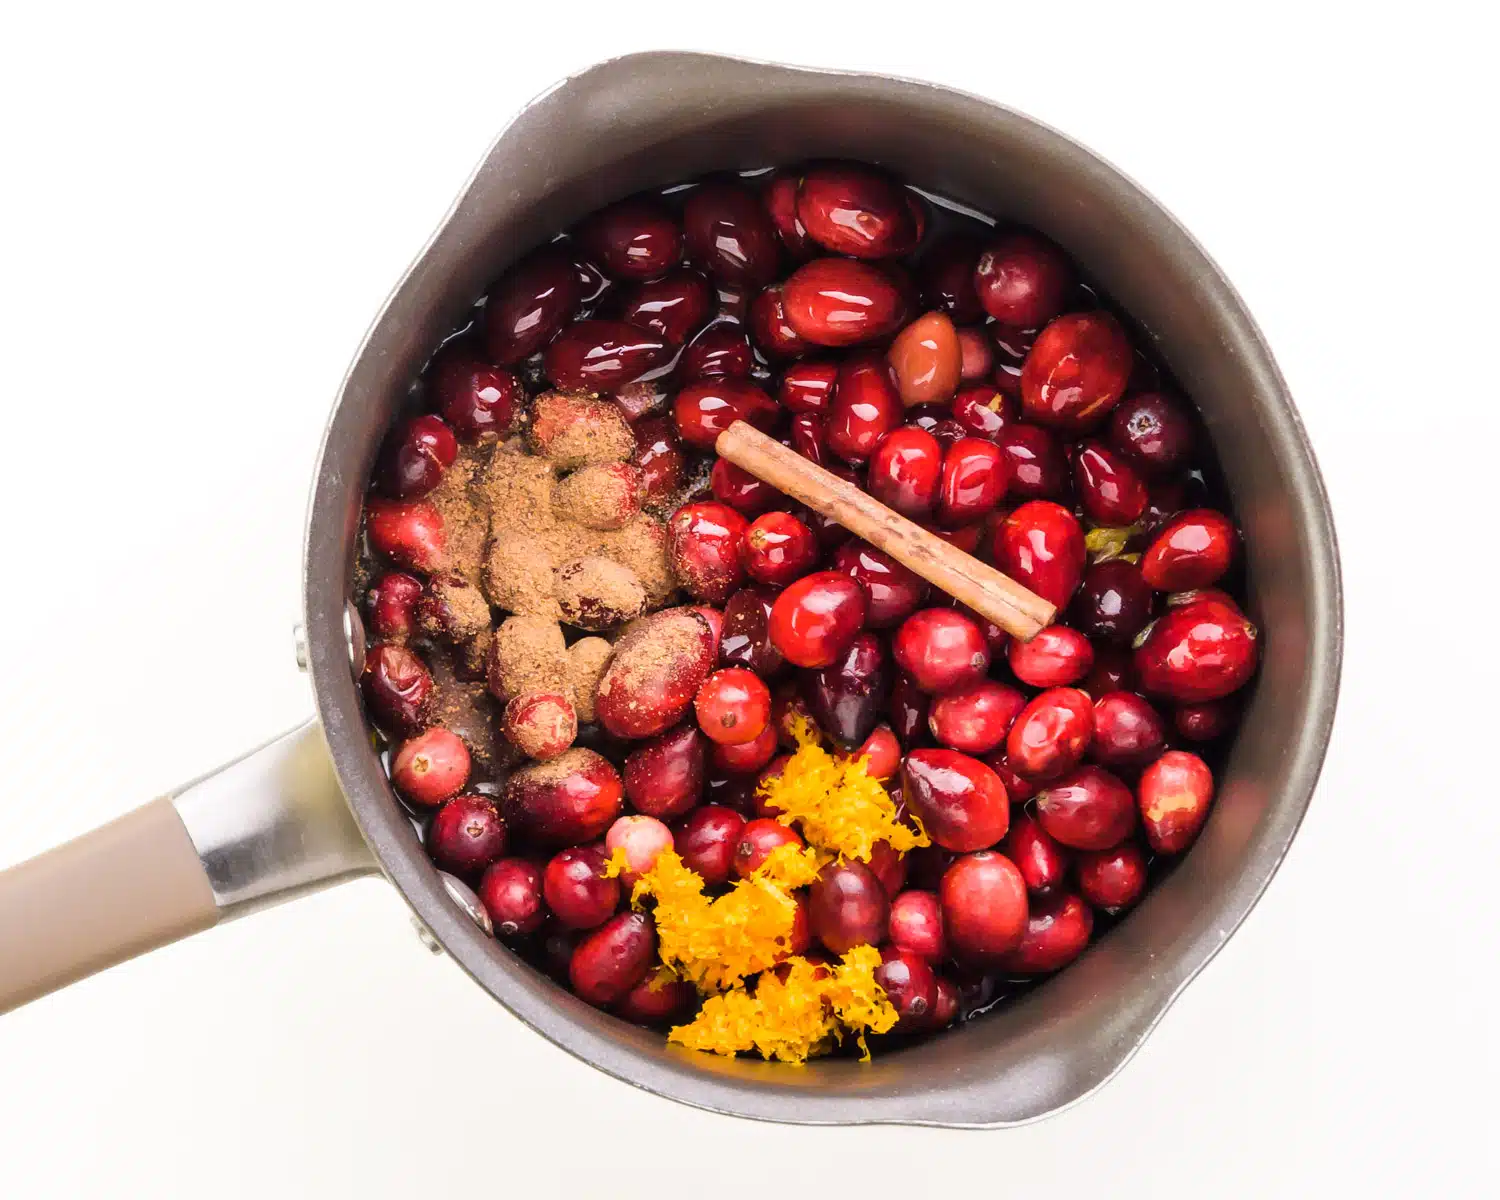 Fresh cranberries are topped with other ingredients in a saucepan.